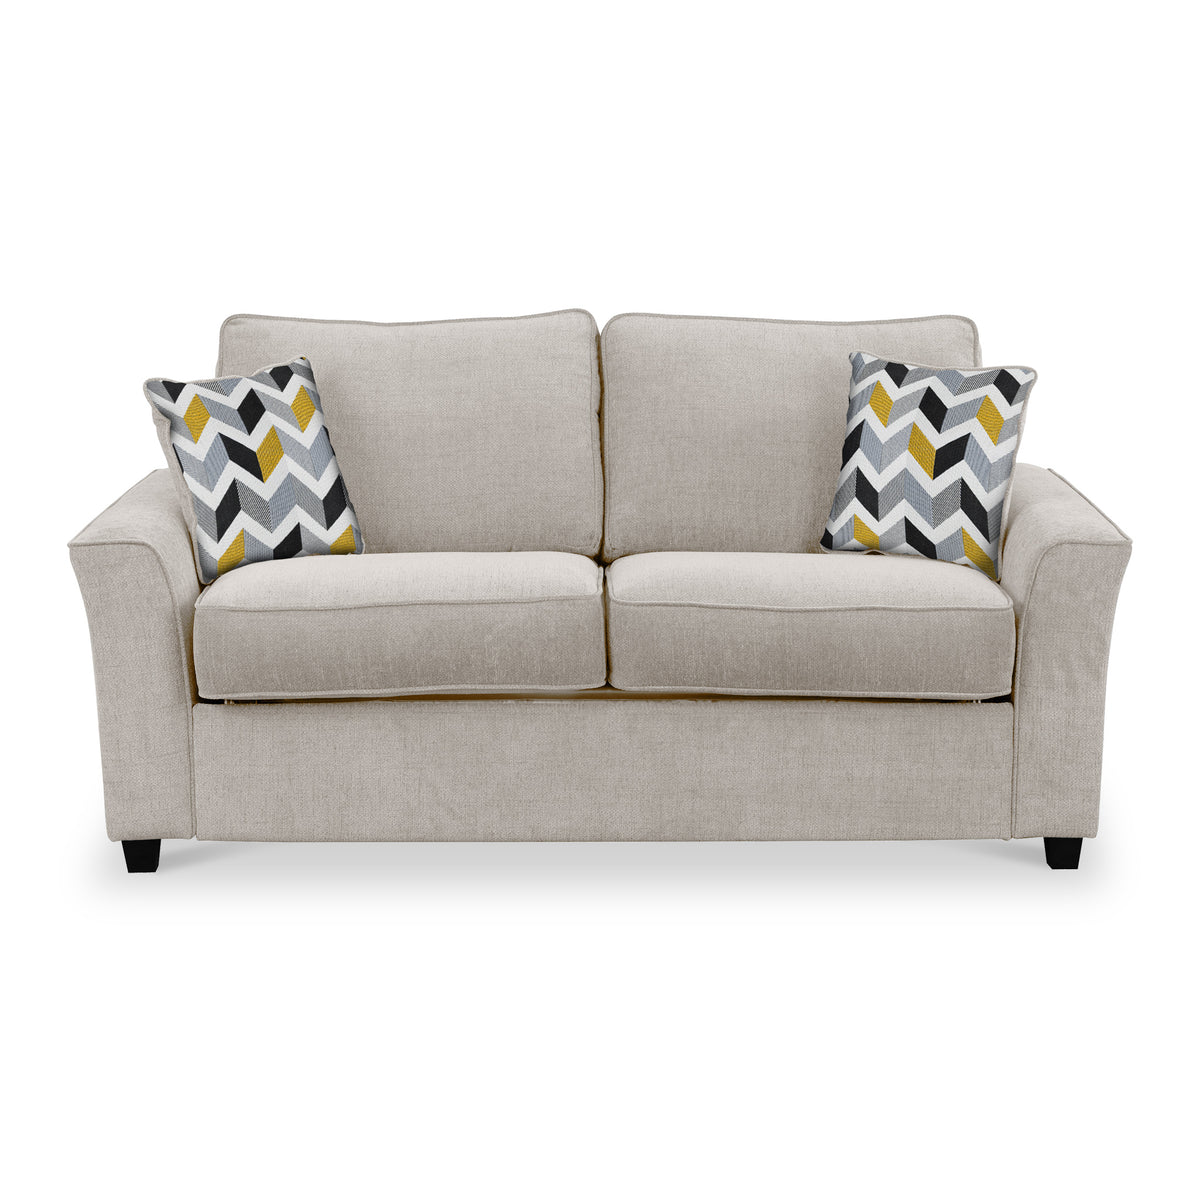 Boston 2 Seater Sofabed in Oatmeal with Morelisa Mustard Cushions by Roseland Furniture